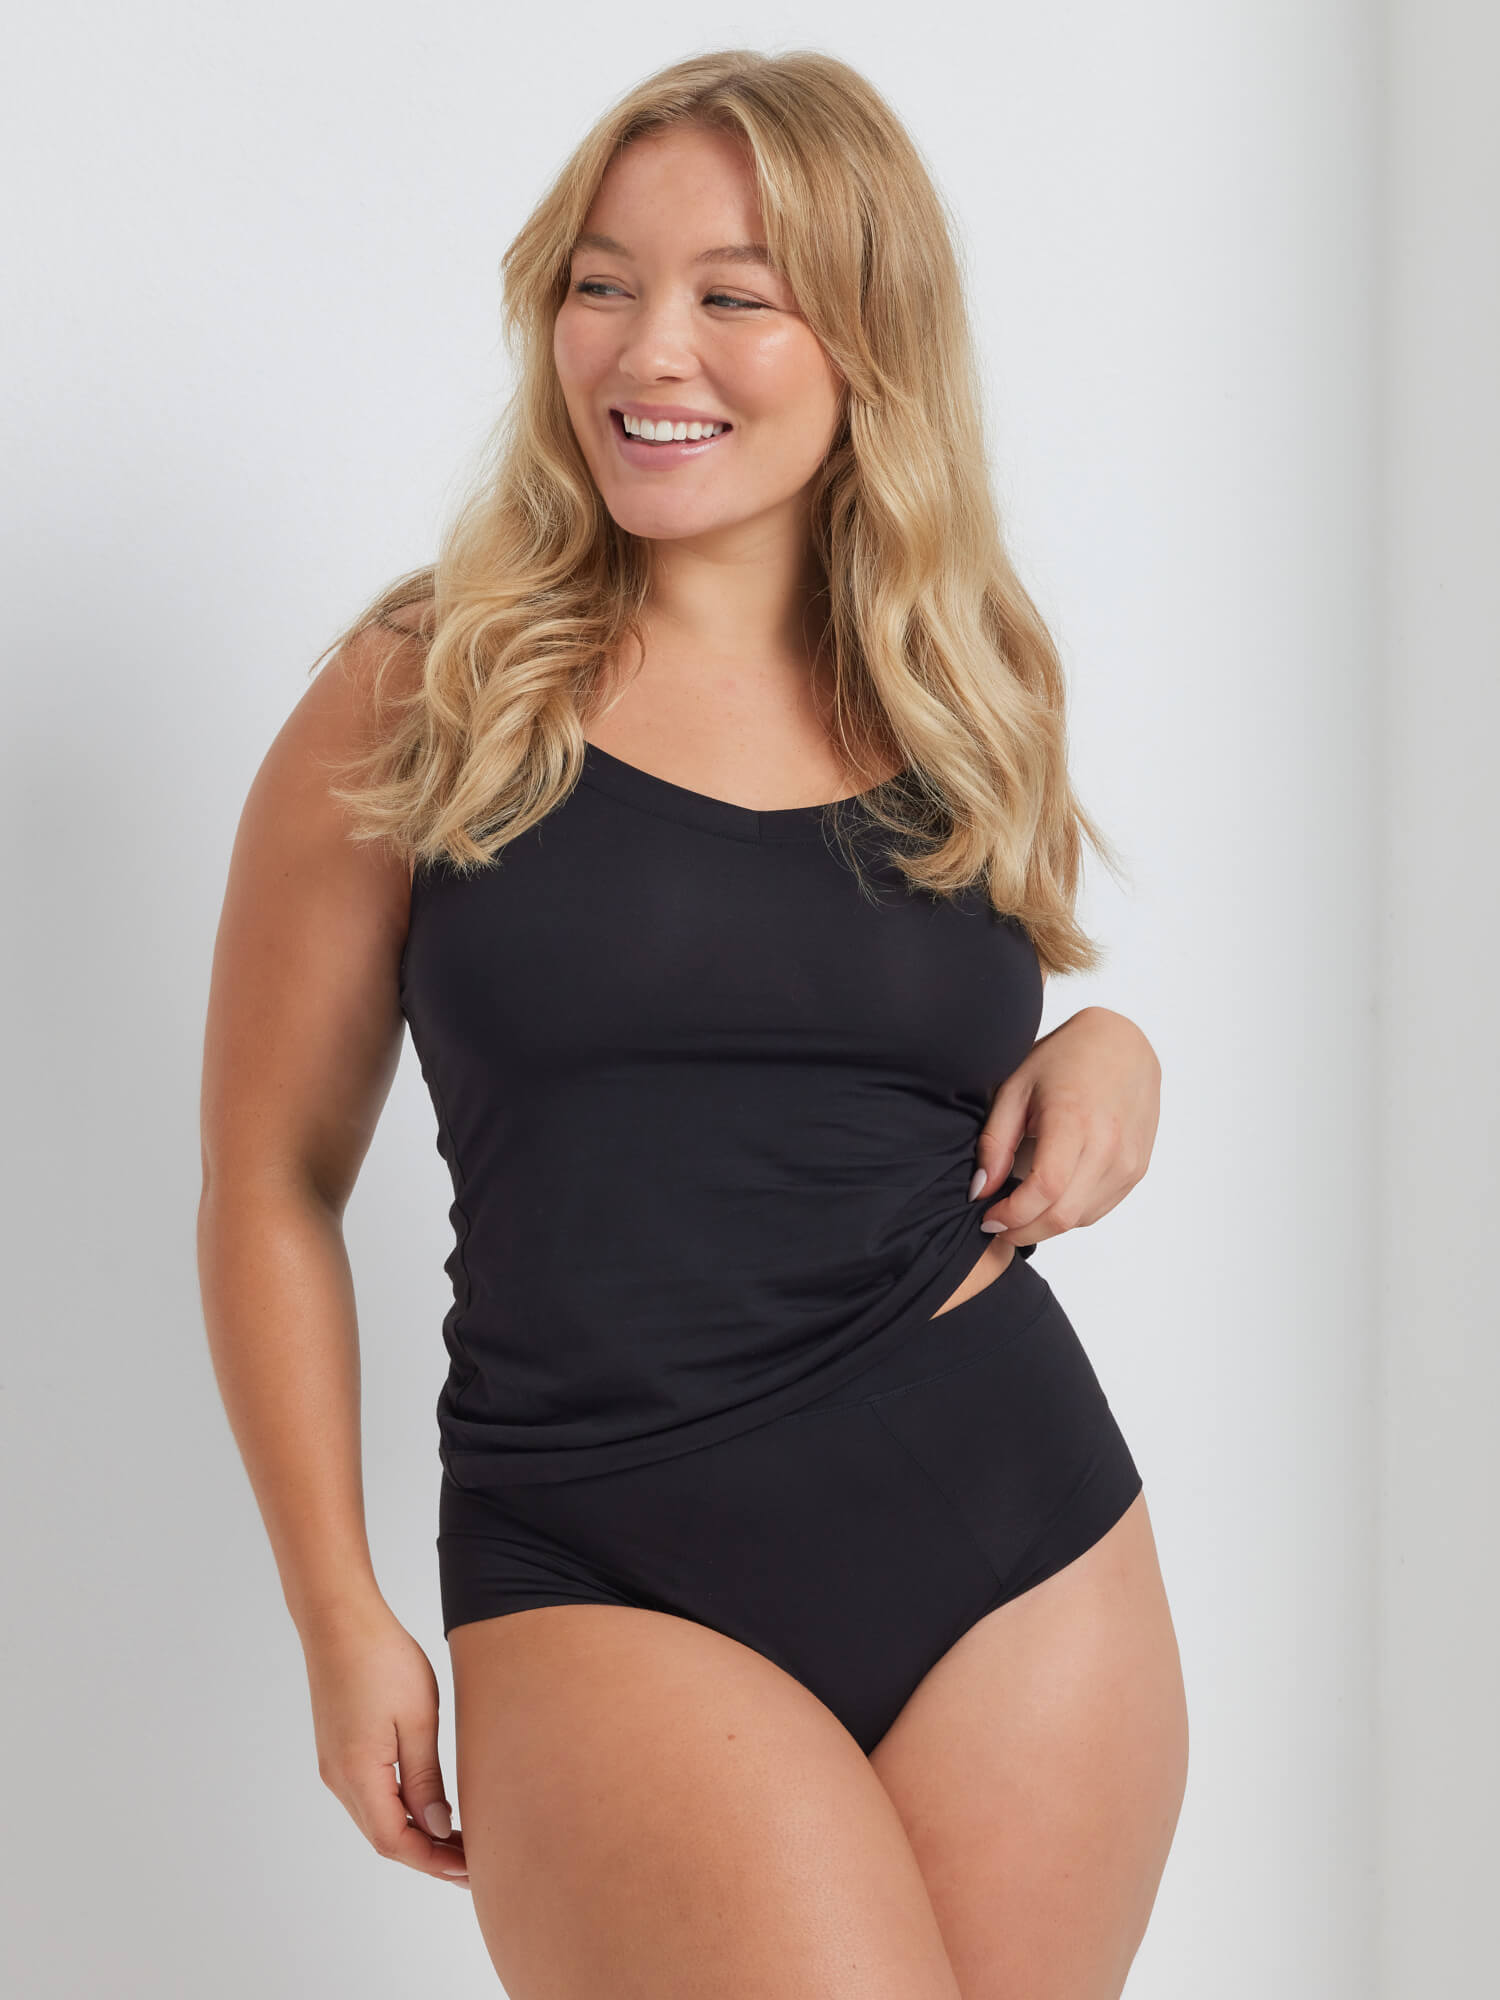 NEW Supima Bliss Cotton Full Brief in Black by Kayser Lingerie